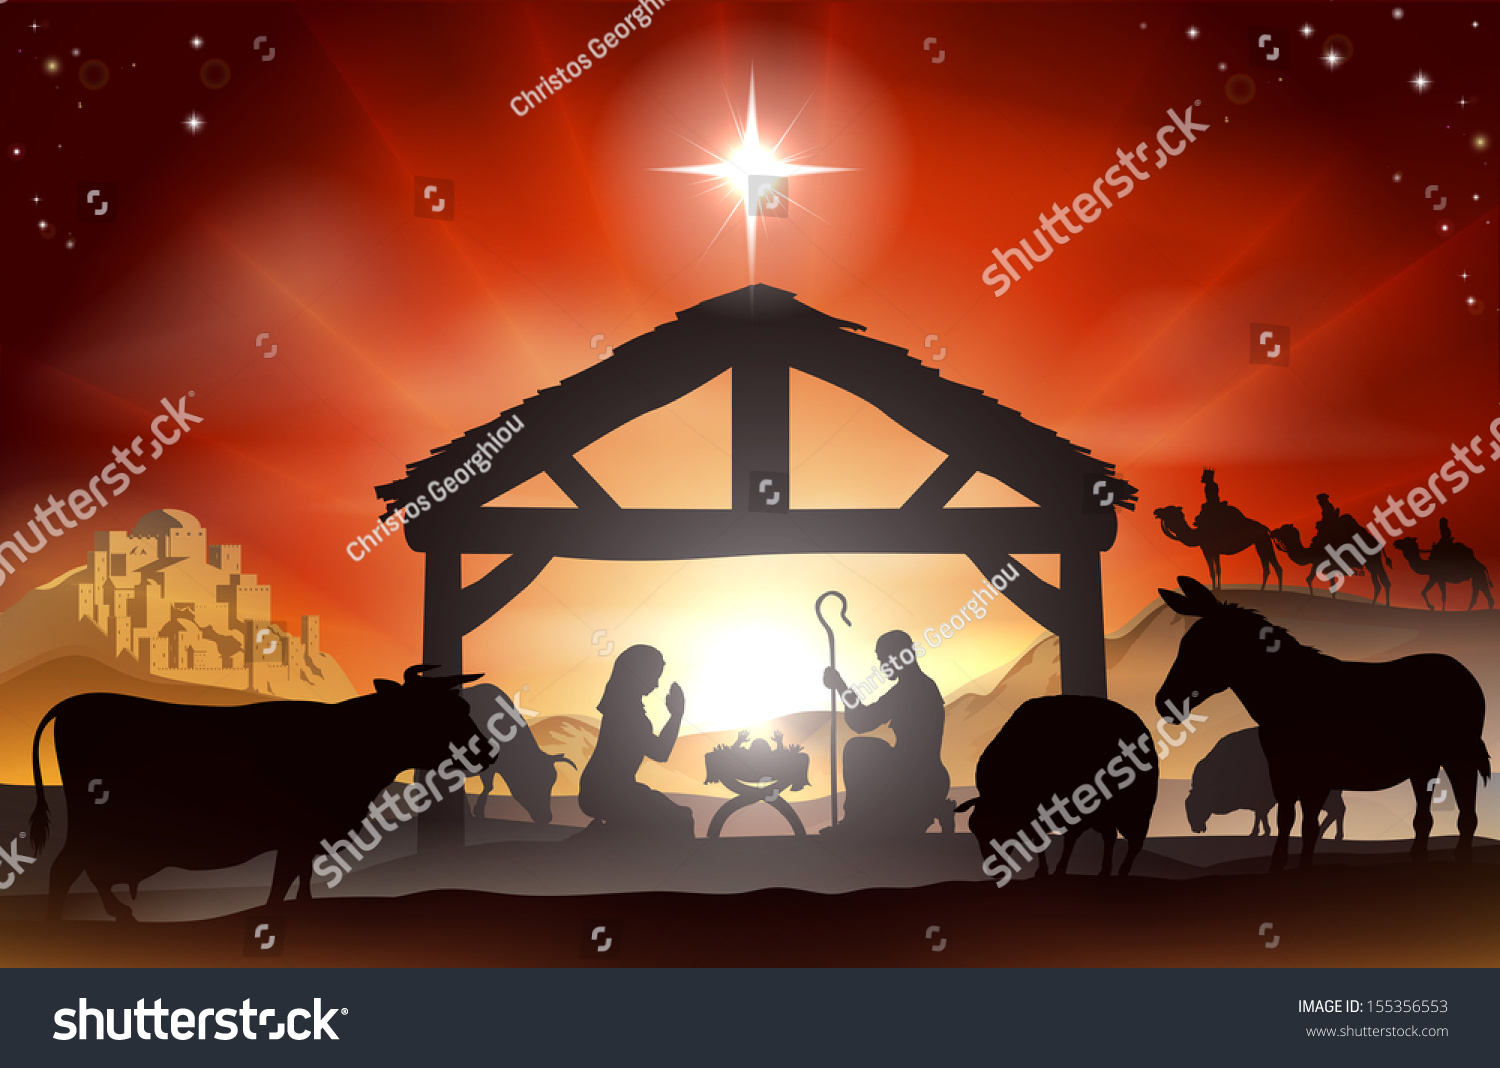 Christmas Christian Nativity Scene With Baby Jesus In The Manger In ...